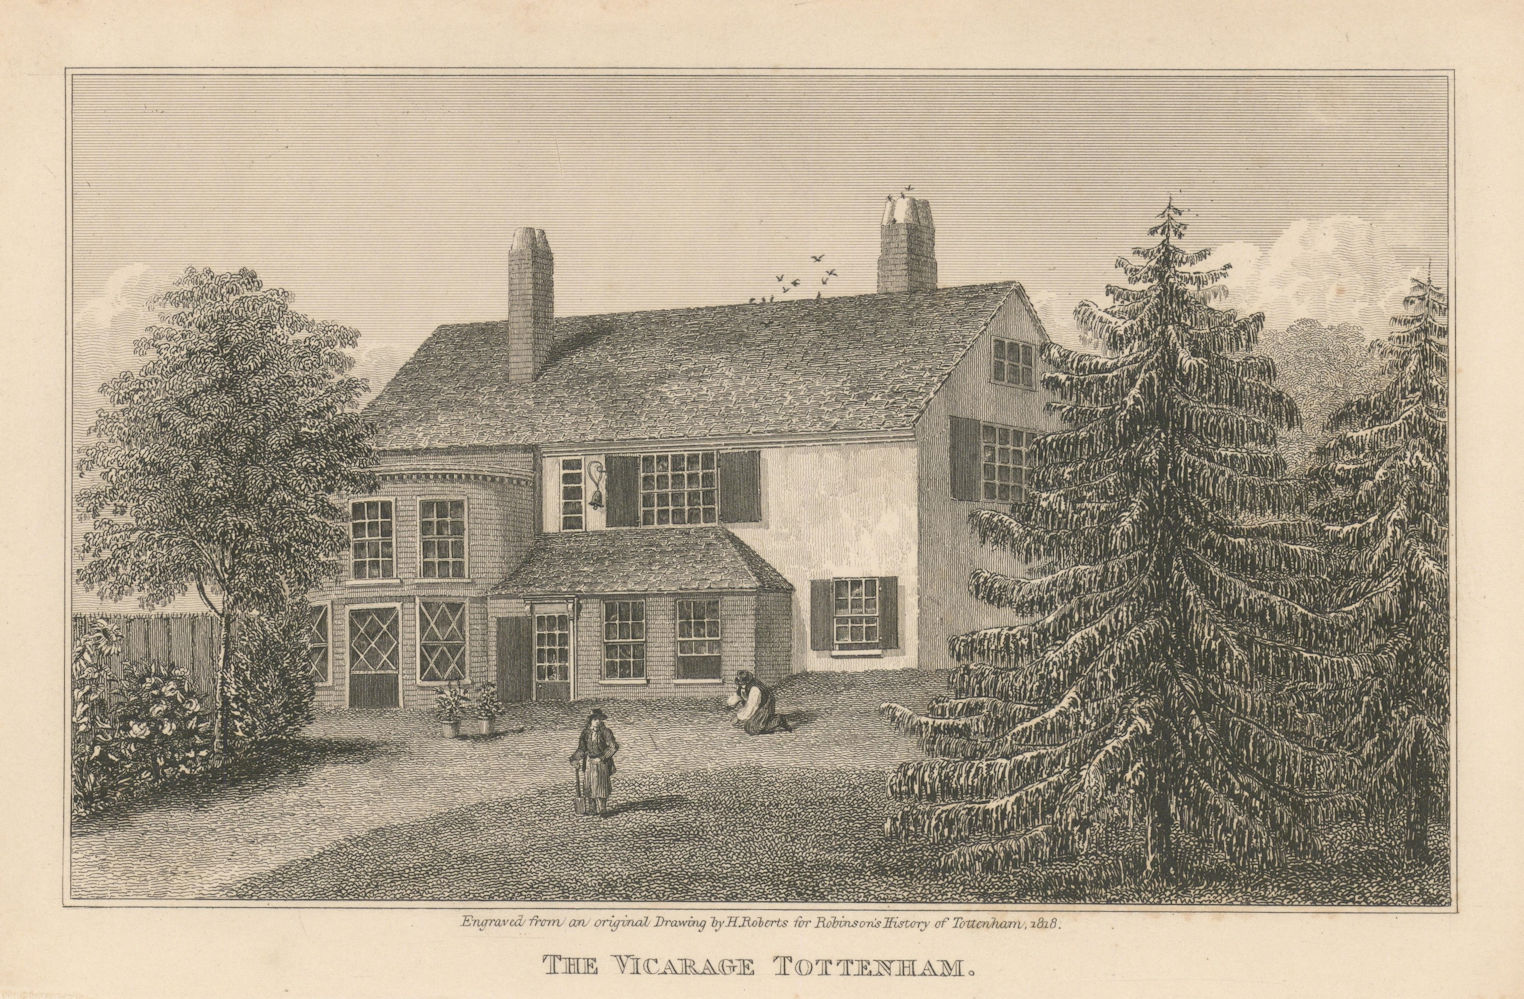 Associate Product The Vicarage, All Hallows Church, Tottenham 1840 old antique print picture